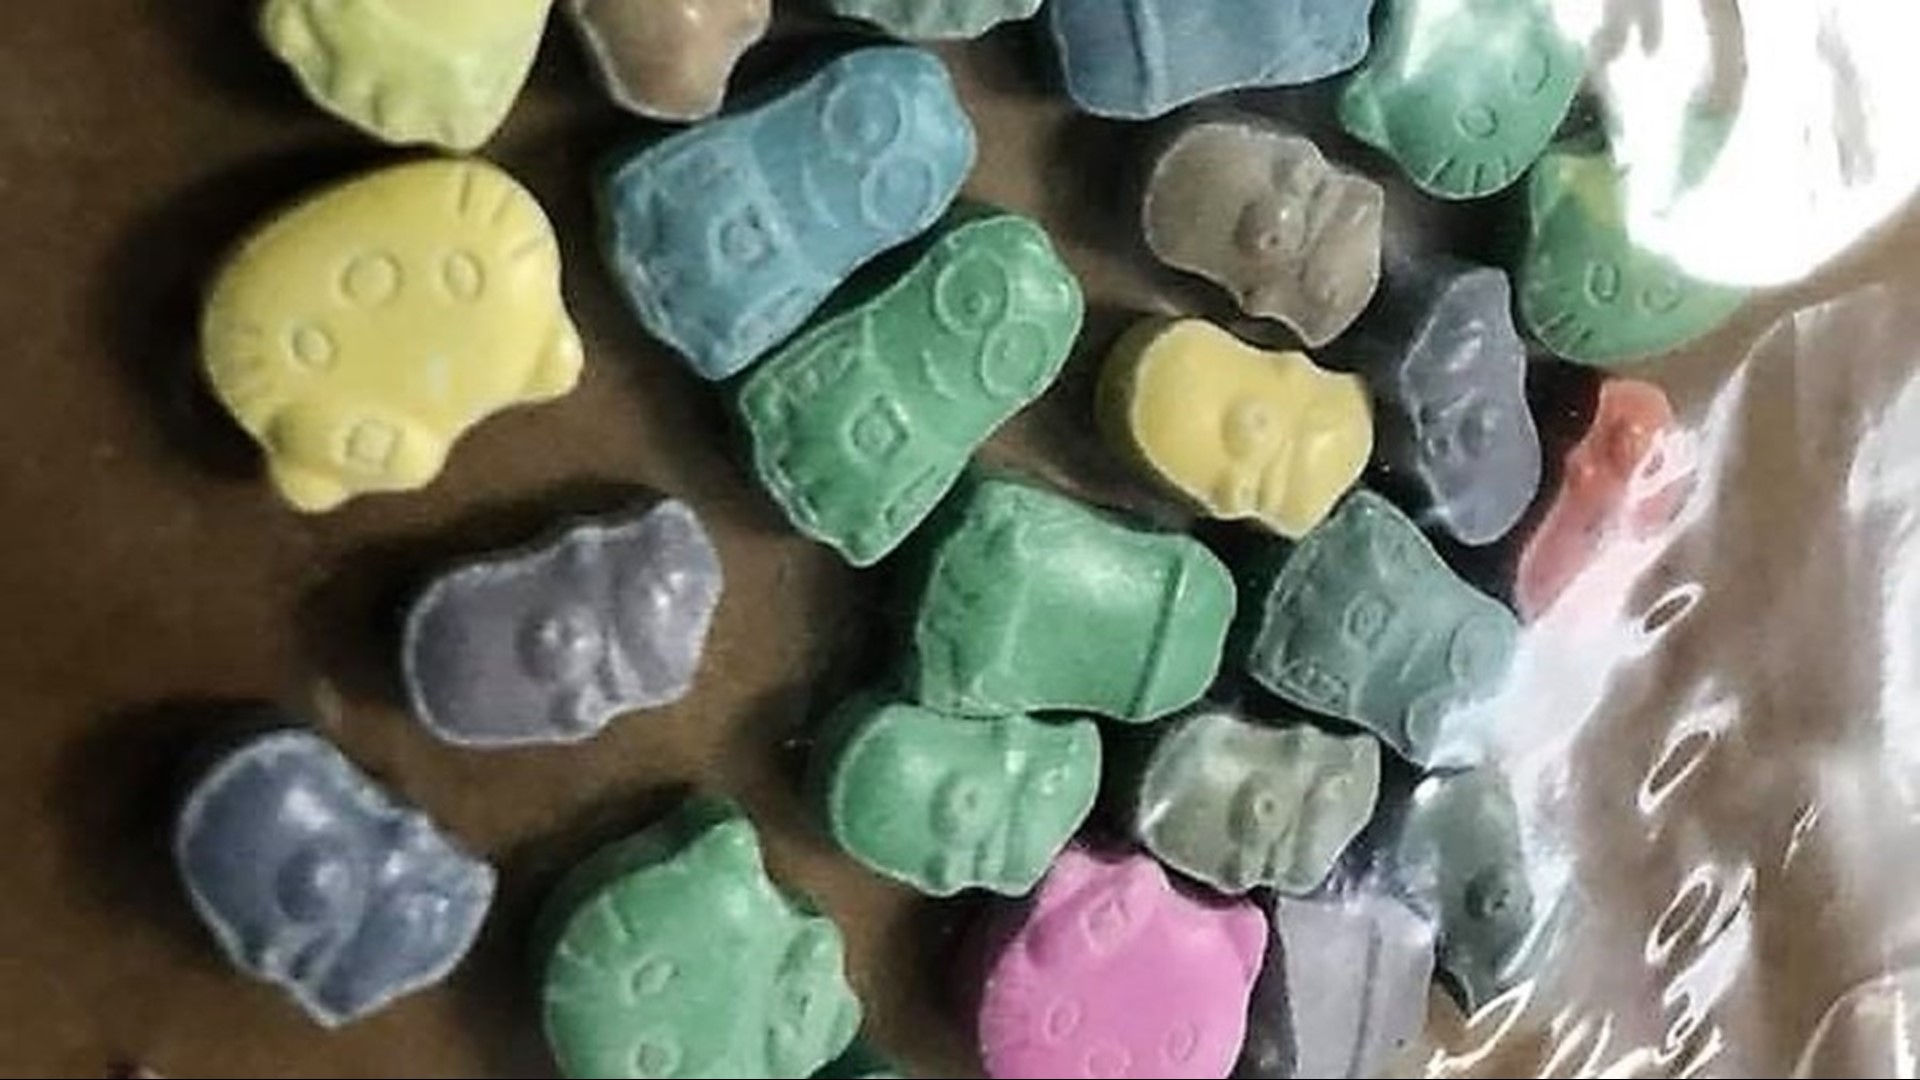 Drugs Disguised As Candy Found In Georgia Drug Bust 